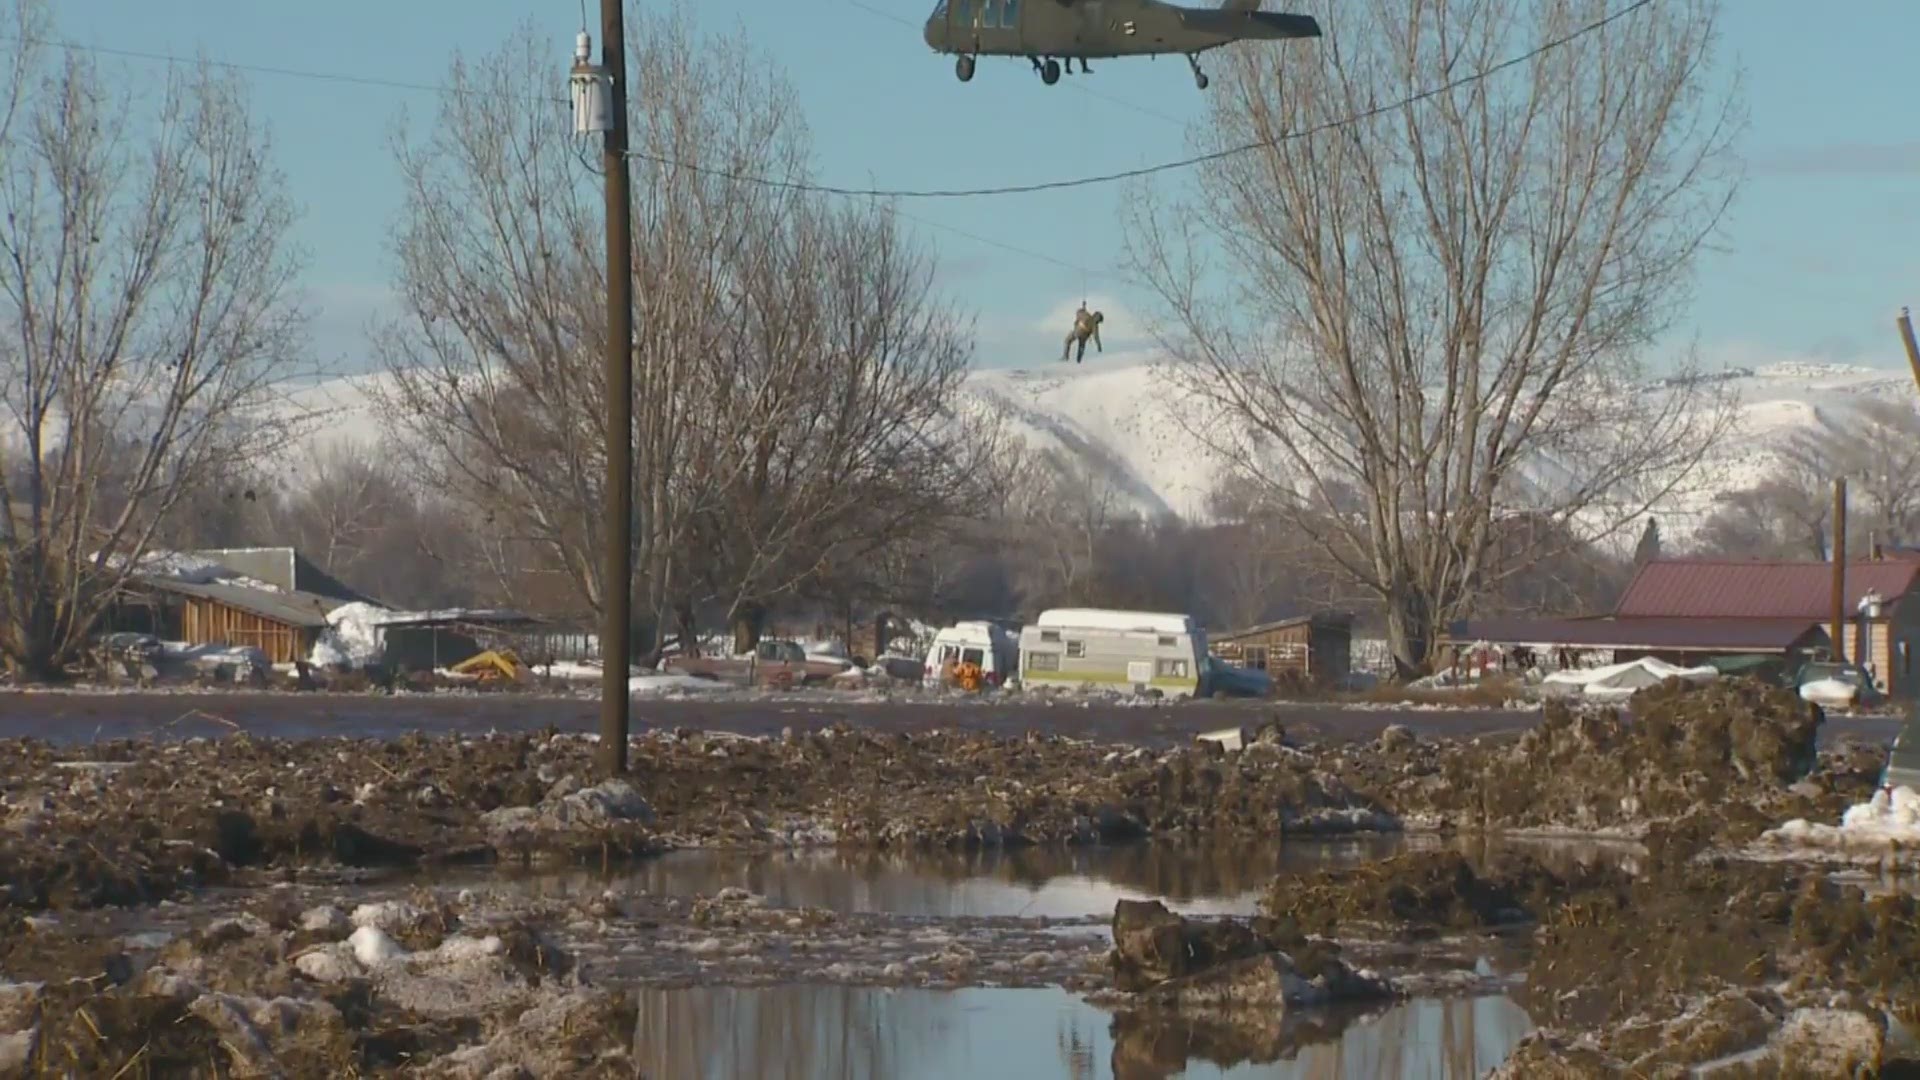 The Idaho Army National Guard UH-60 Blackhawk helicopter and crew flew over the house after 2 p.m., hovering low enough to allow several emergency responders to jump out into the water near the man's property.